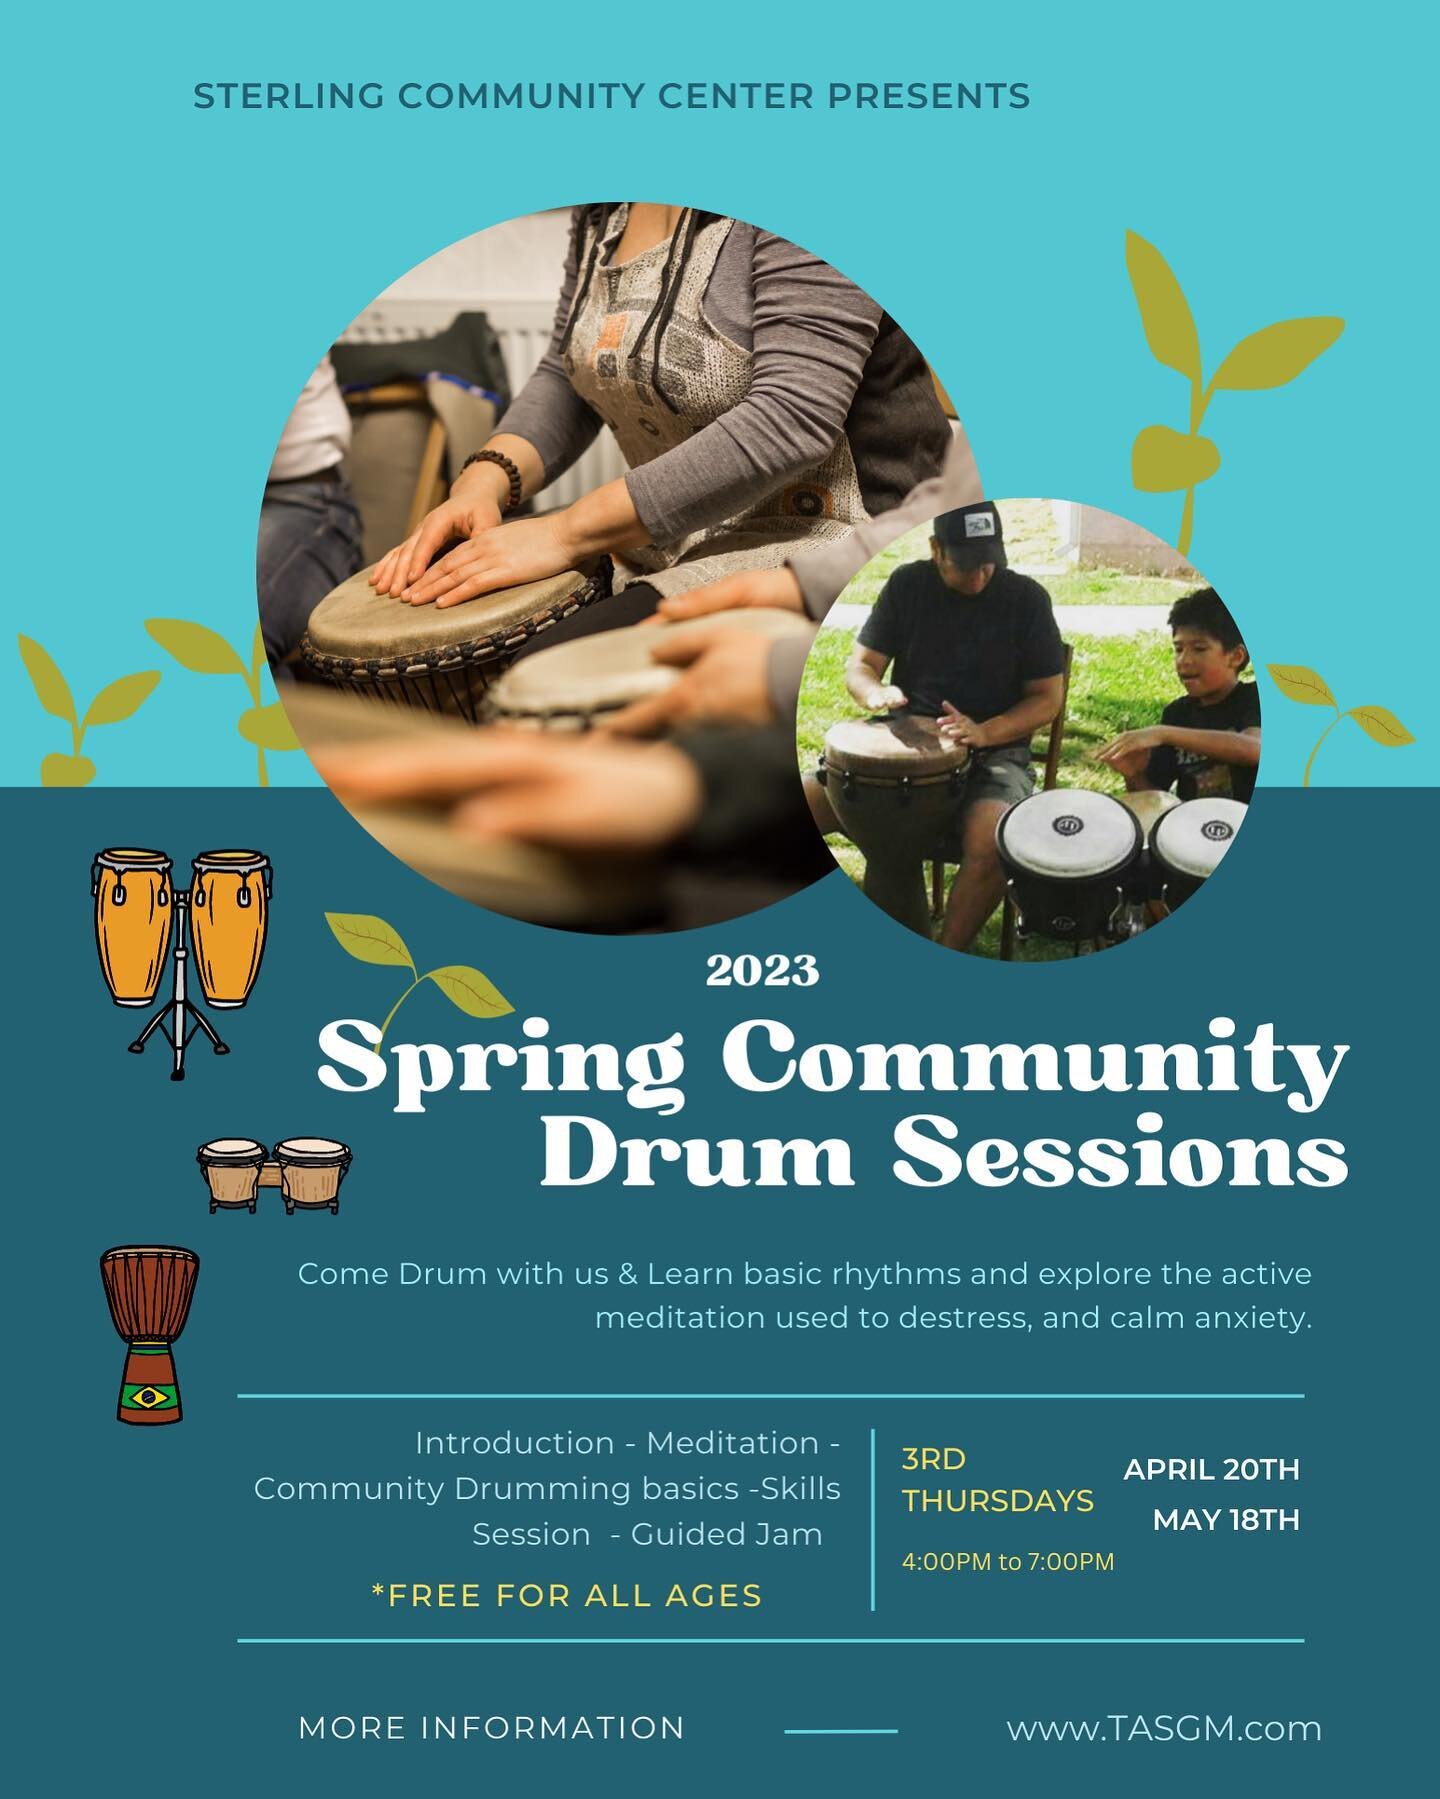 Hello wonderful community! Now is your chance to try the last days of drumming. We will be at the @sterlingcommunitycenter with our drums for a 3 hour jamming session. The event at the community center is *FREE* and all ages are welcome. 

 (We recom